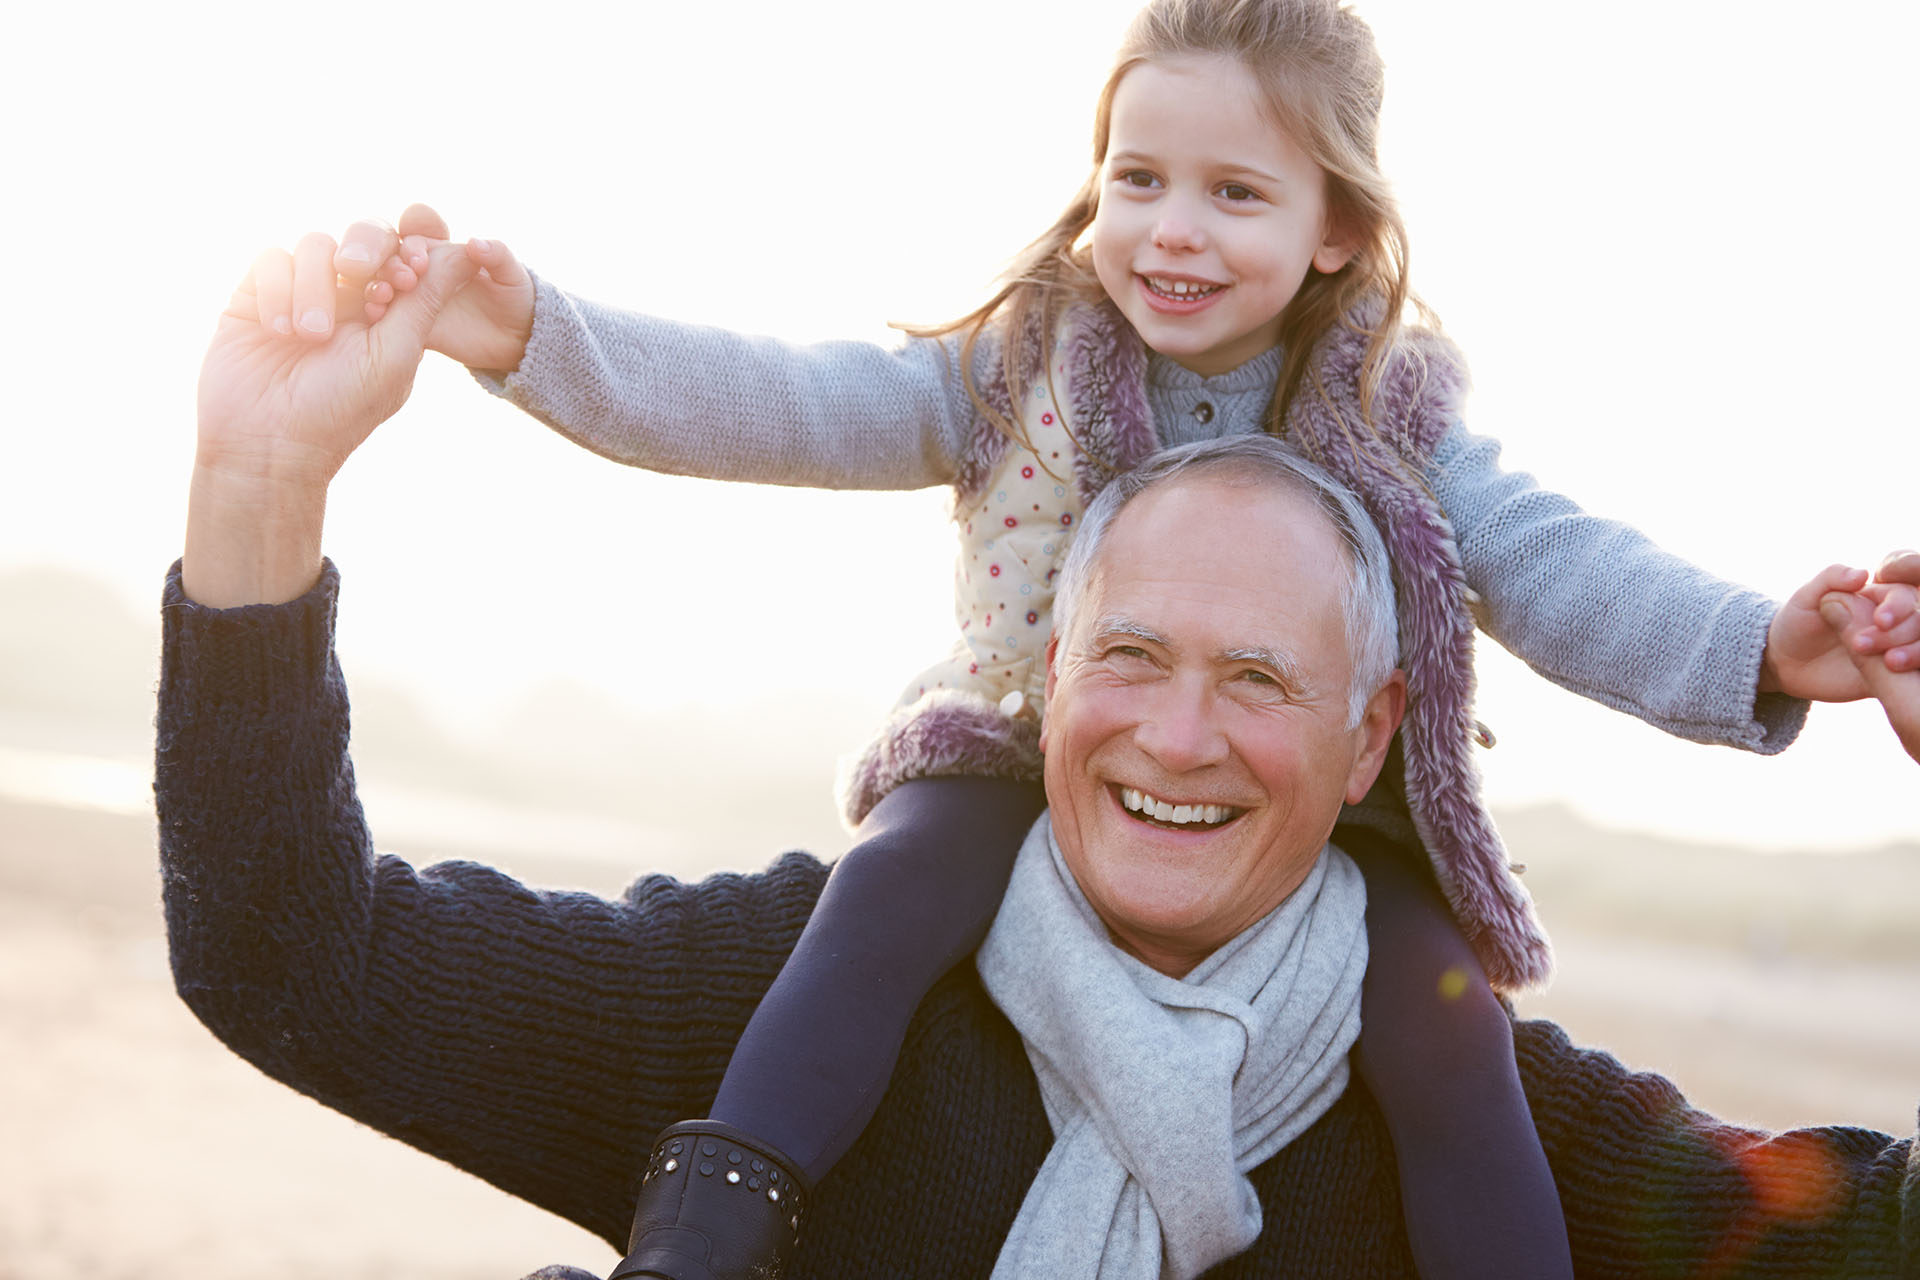 Do you rely on grandparents for help with childcare?